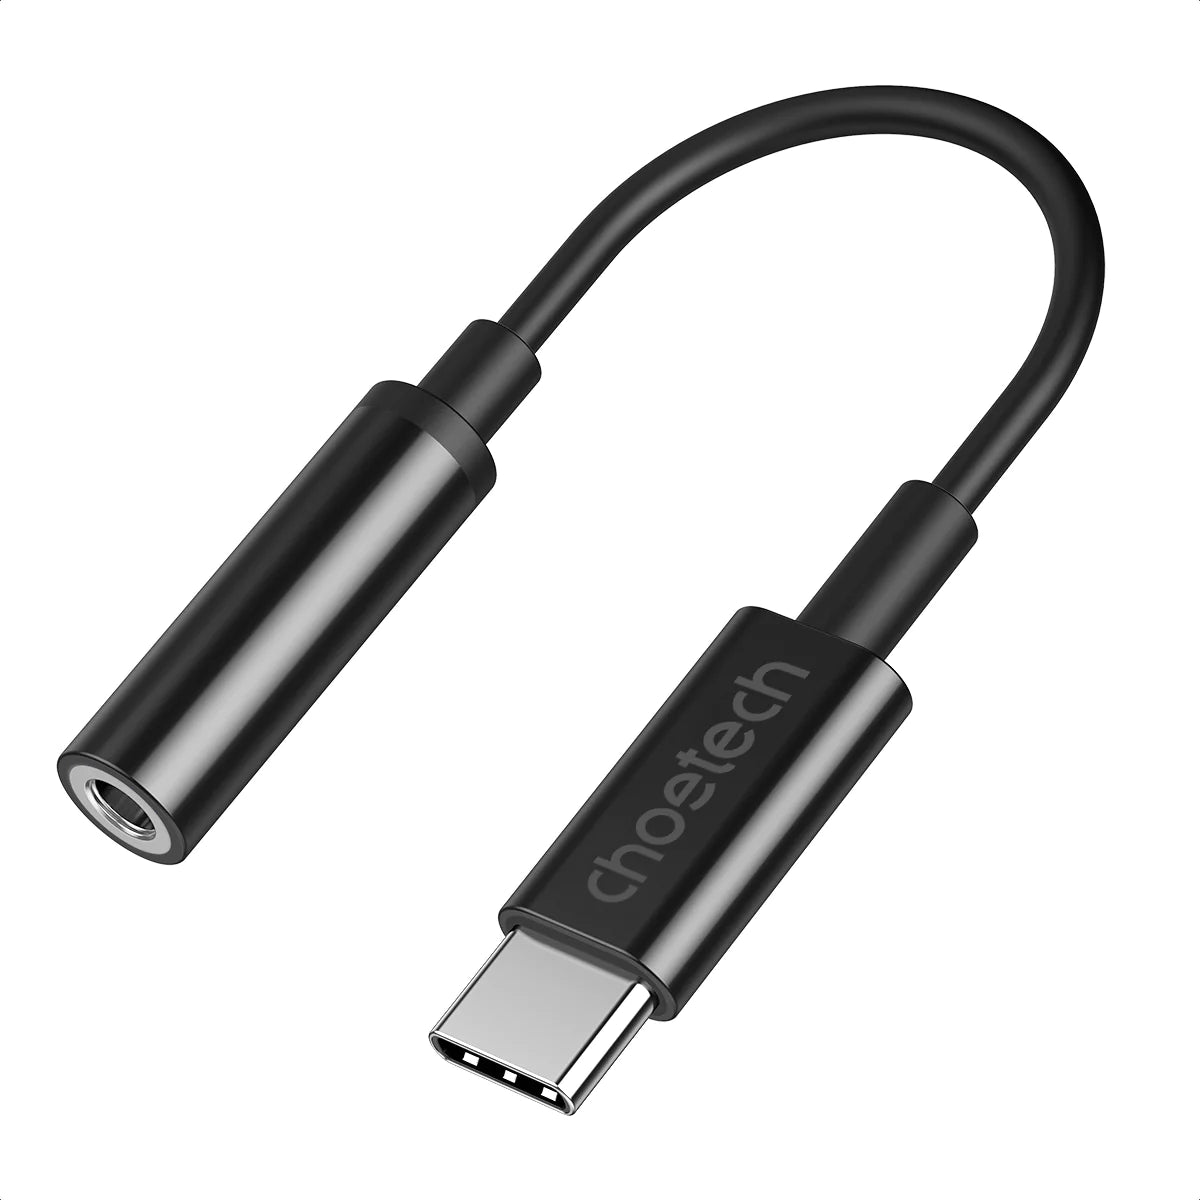 Choetech USB-C to 3.5mm AUX Headphone Adapter with DAC Chip